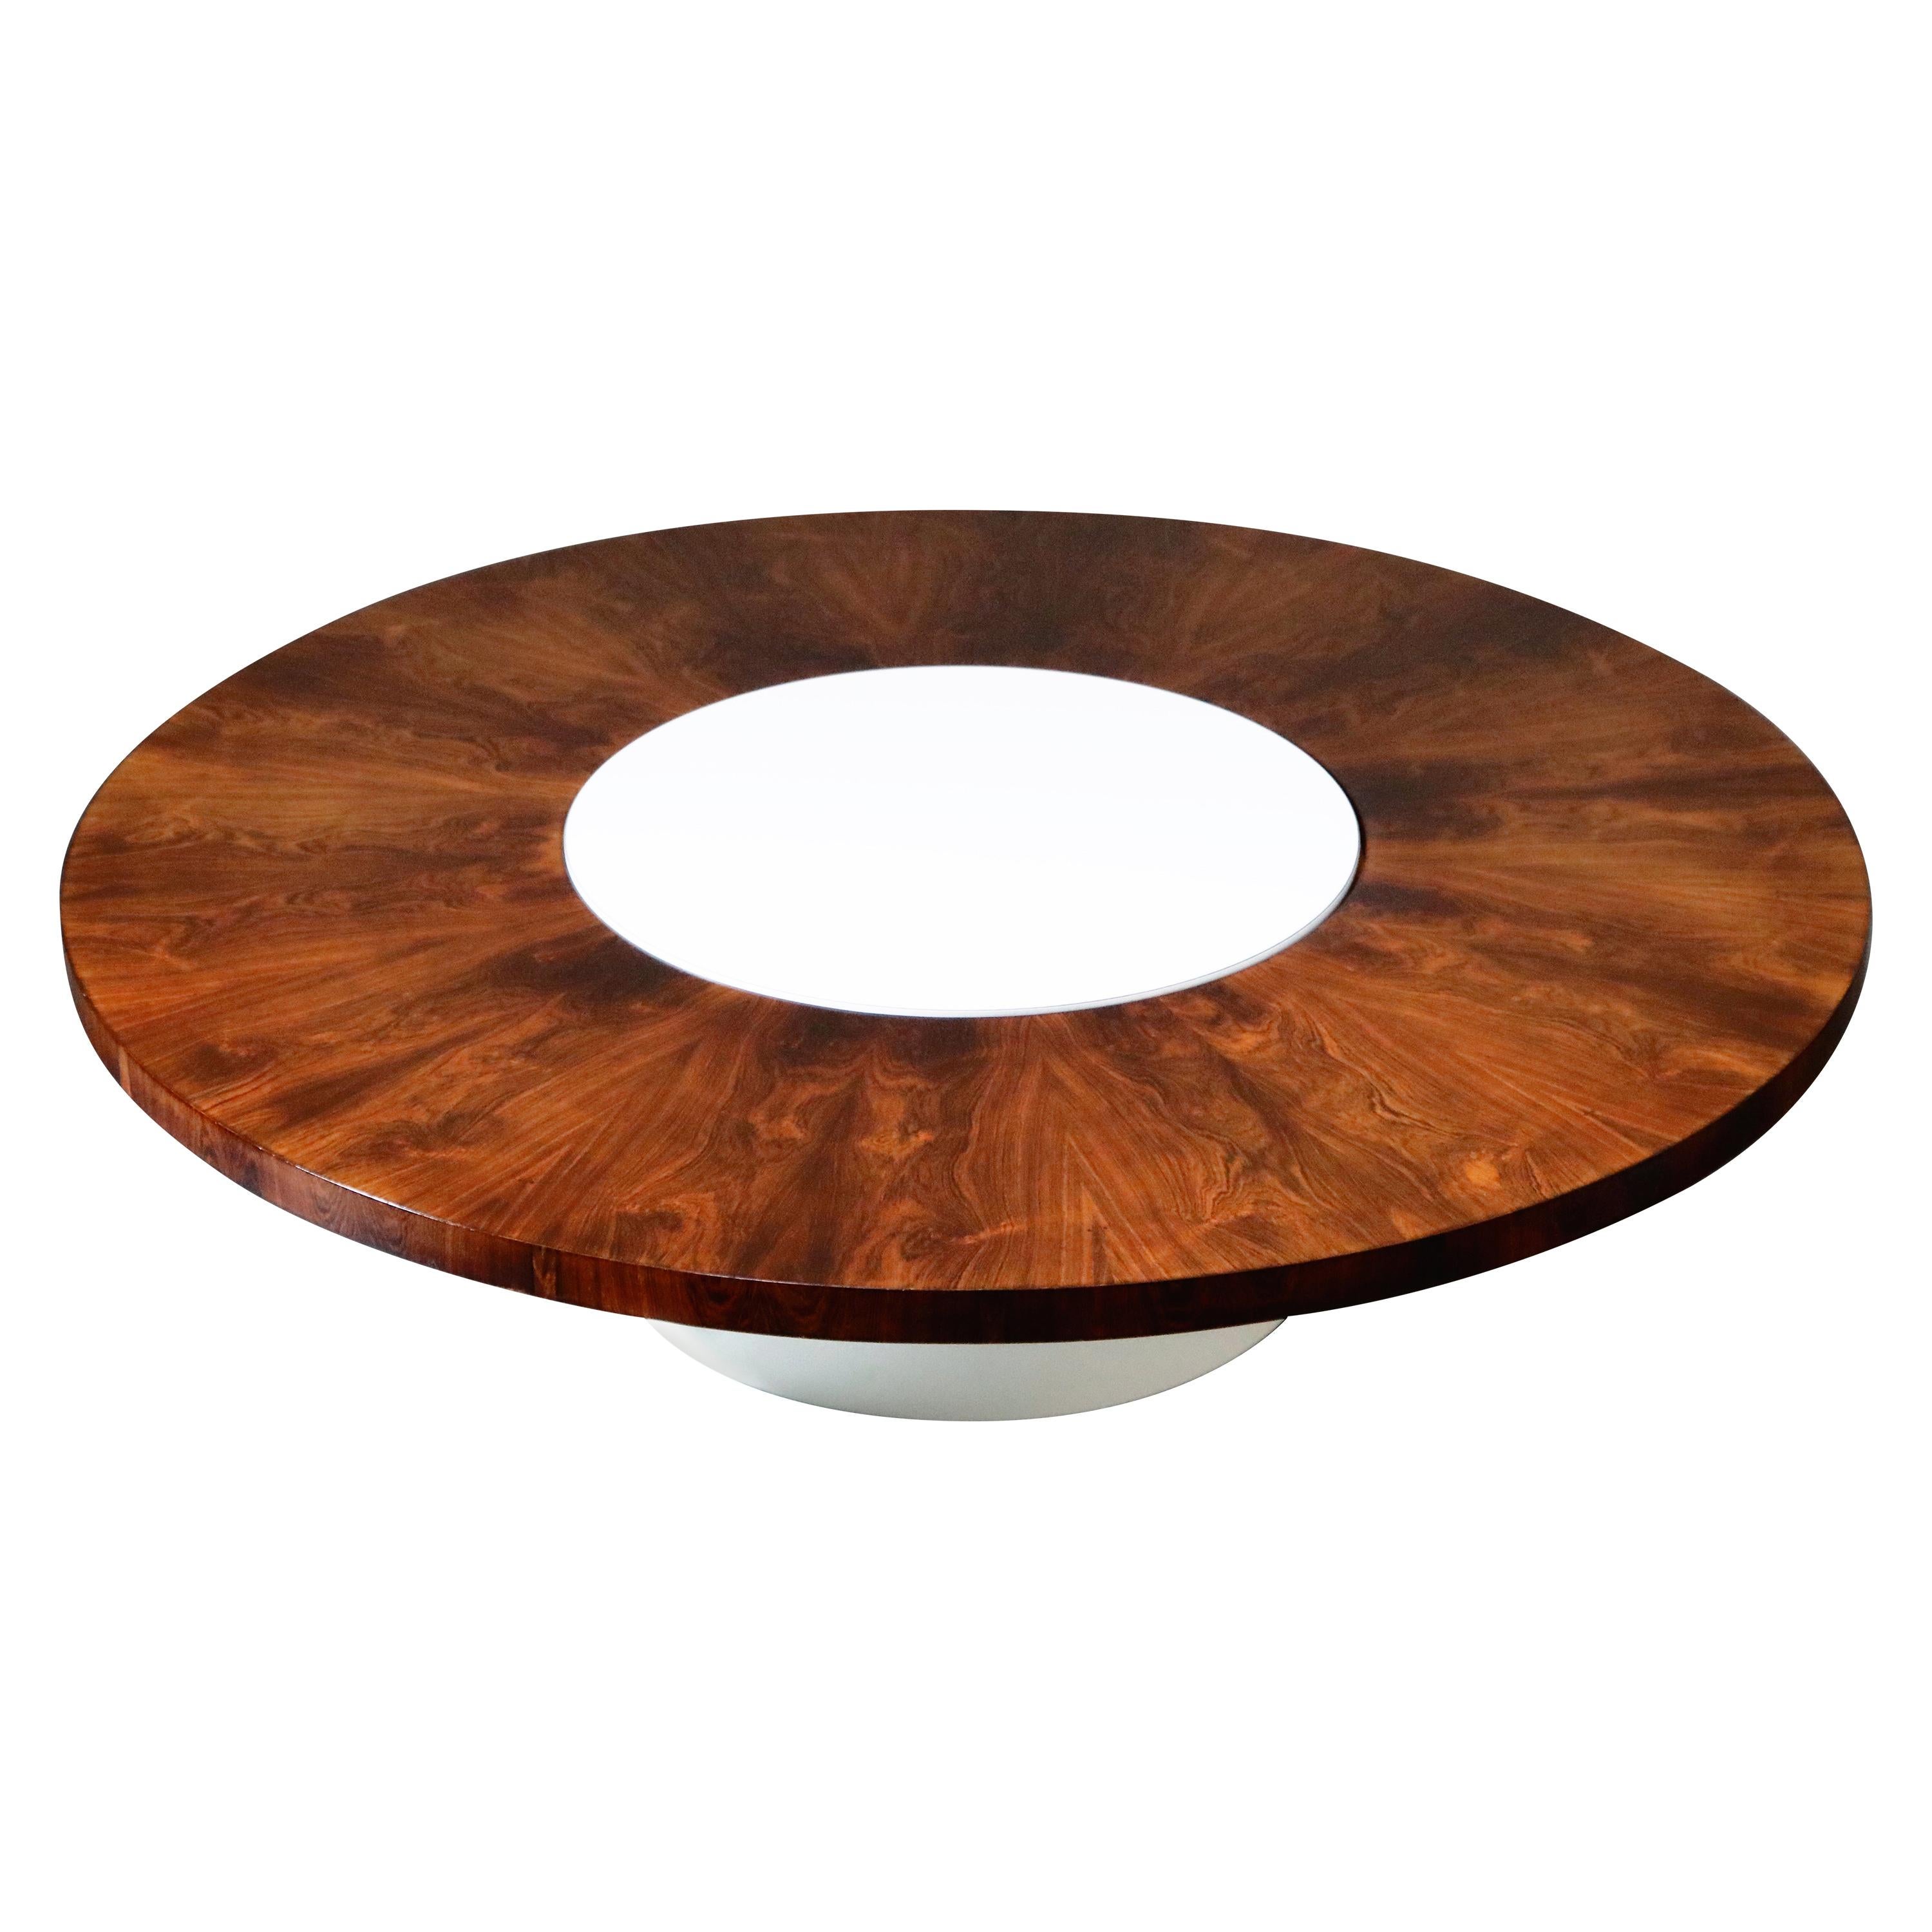 Milo Baughman for Thayer Coggin Rosewood Lazy Susan Rotating Coffee Table, 1968